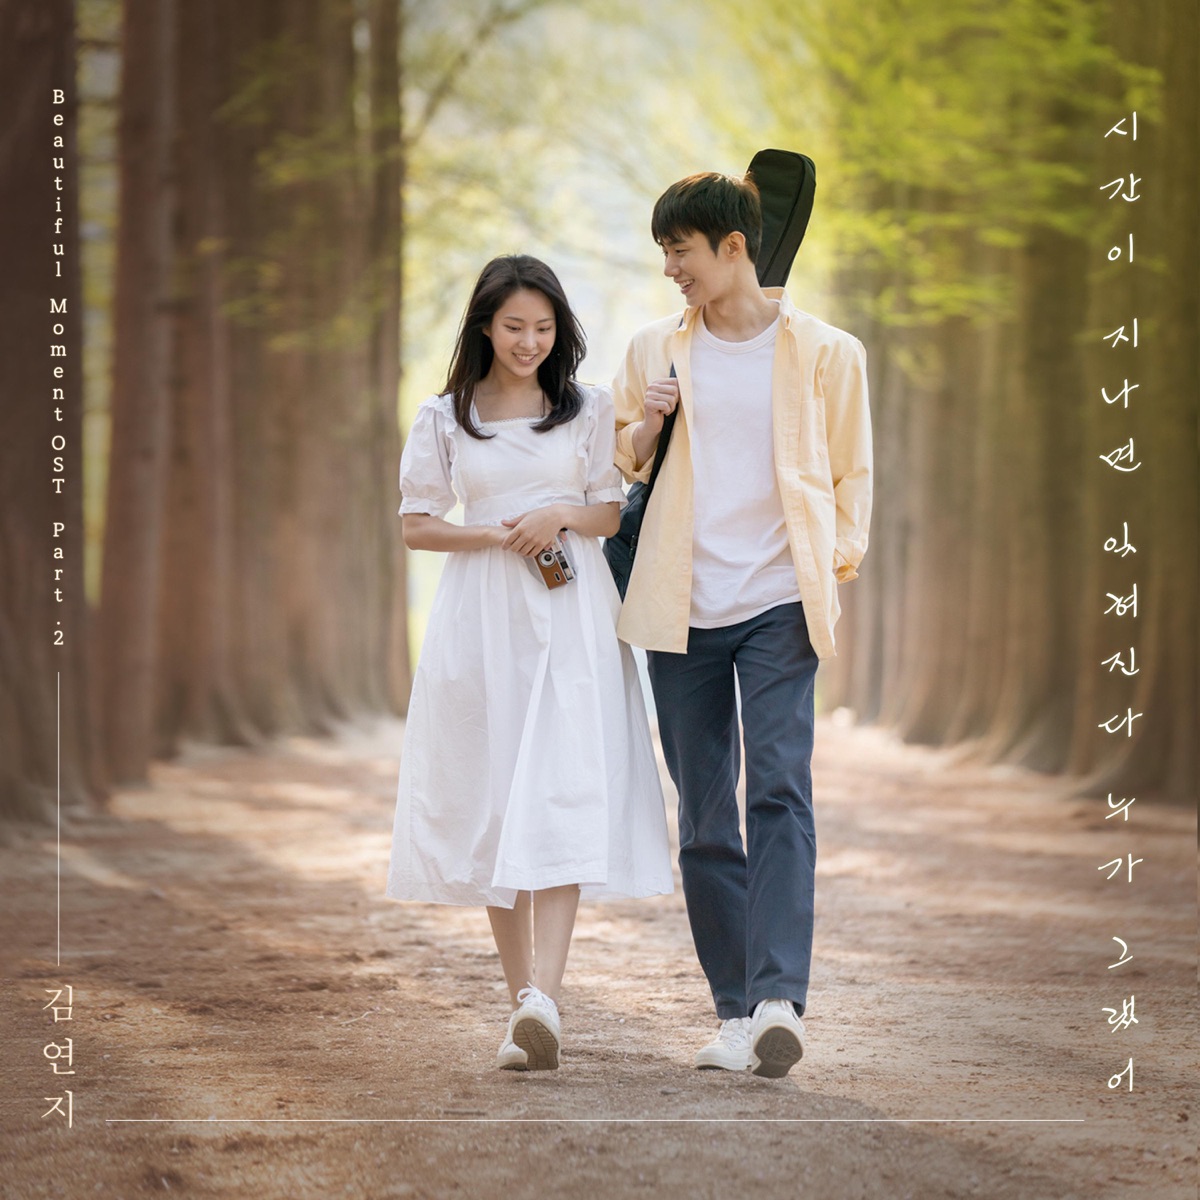 Kim Yeon Ji – Someone Said Time Make Me Forget The Love Soon (From “Beautiful Moment” [OST]), Pt. 2